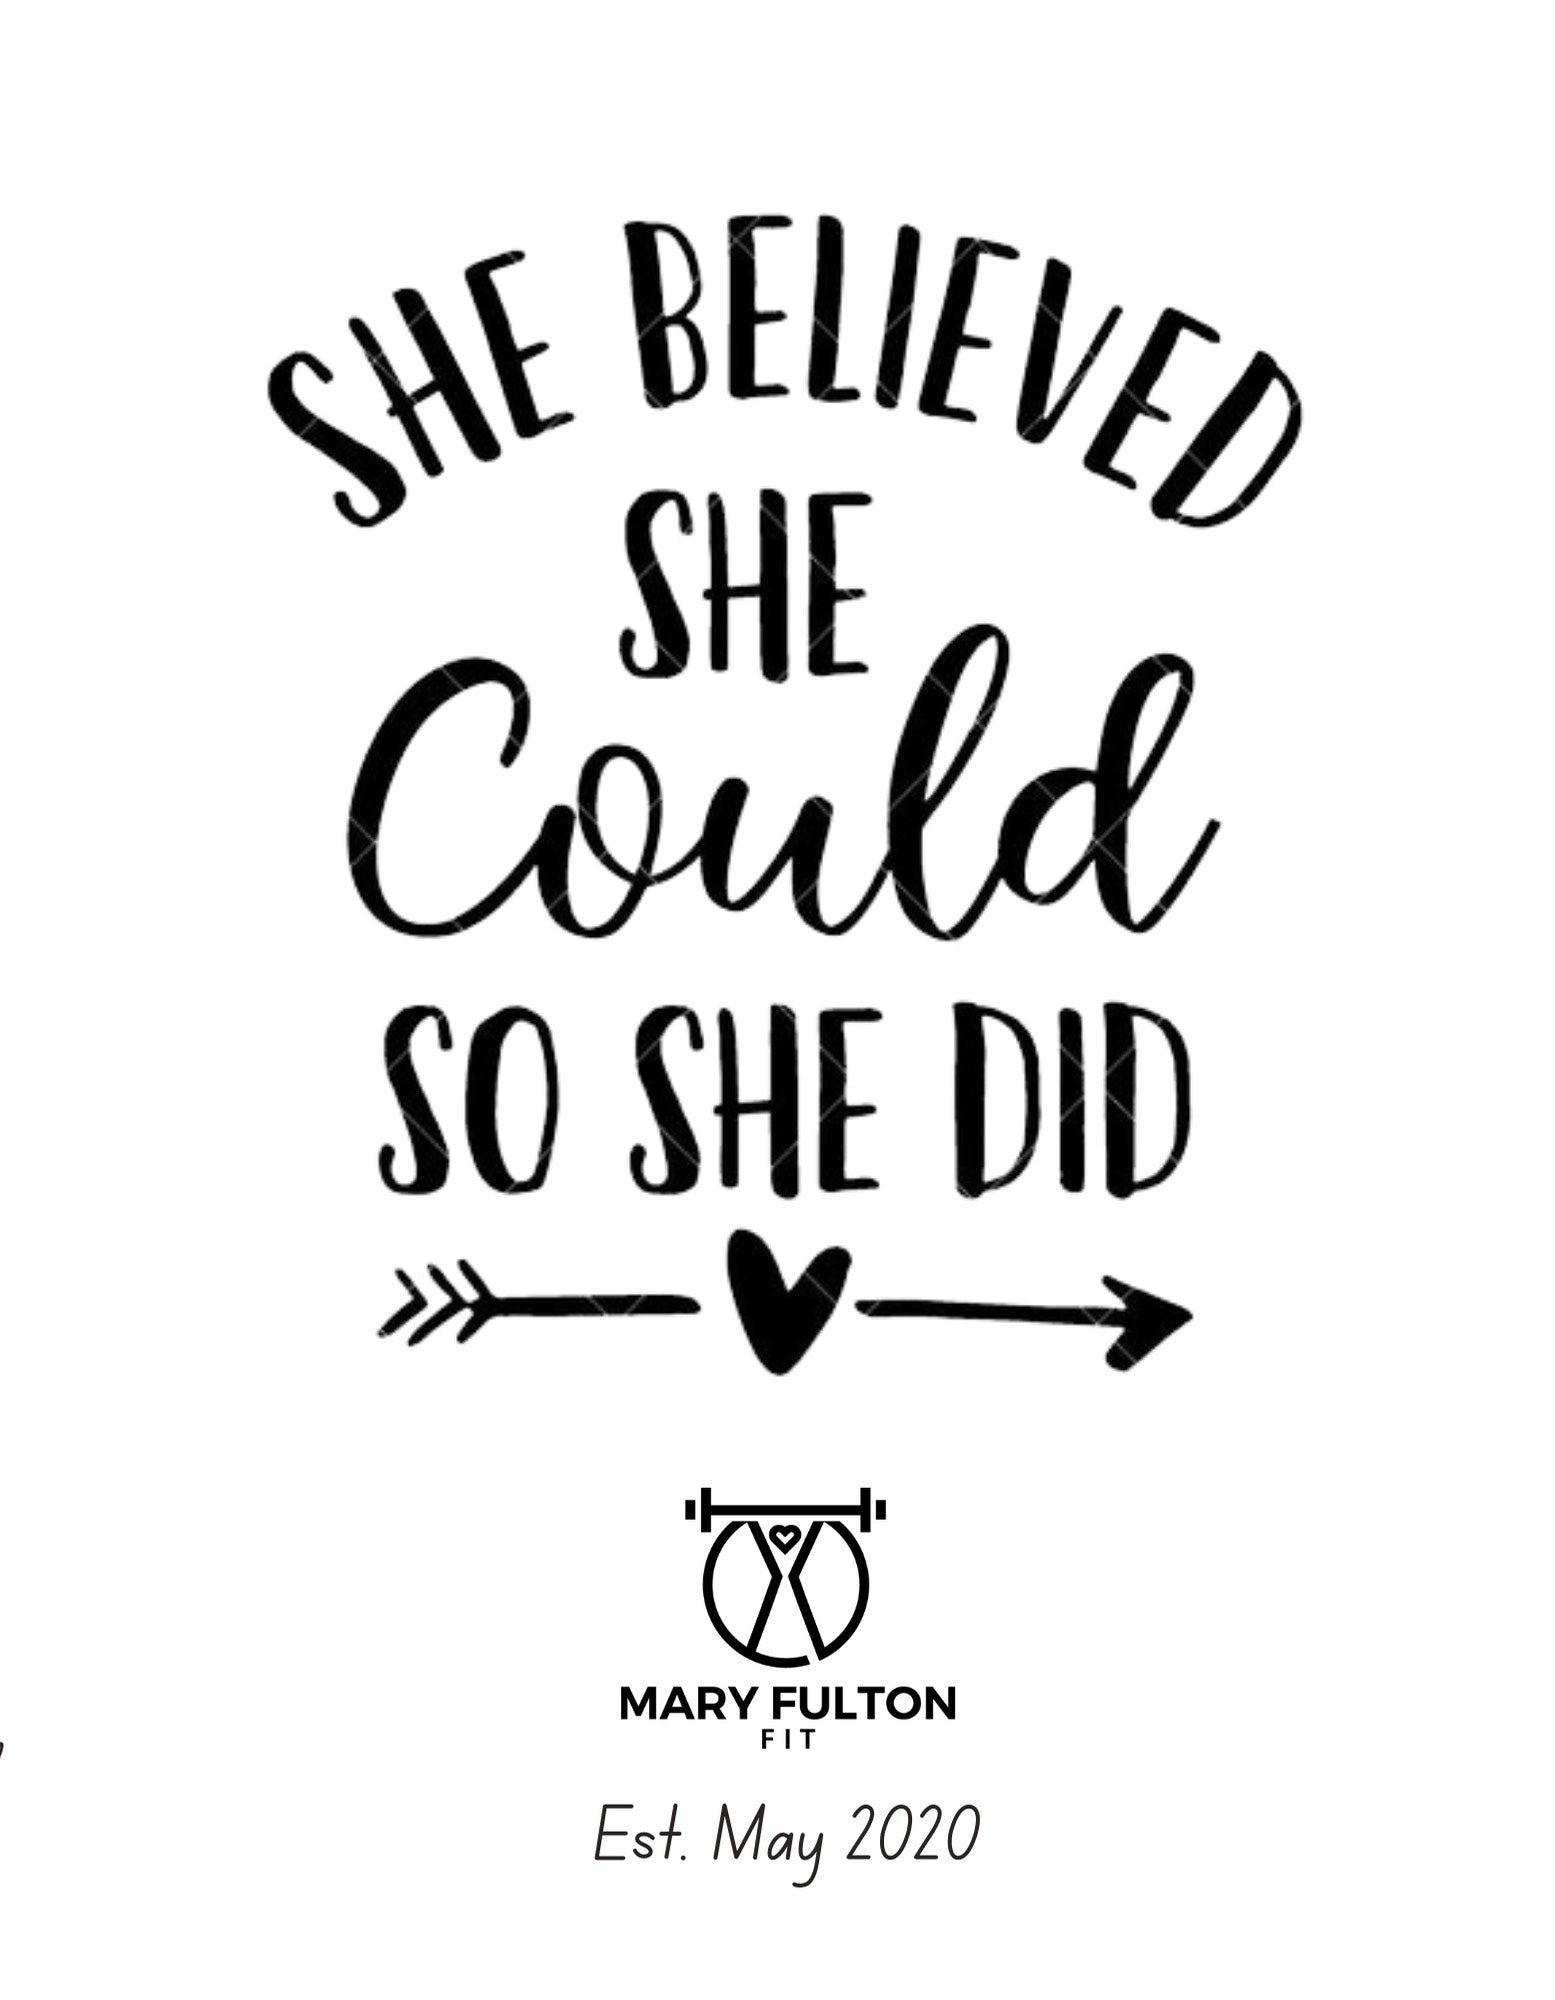 She believed She could so she did